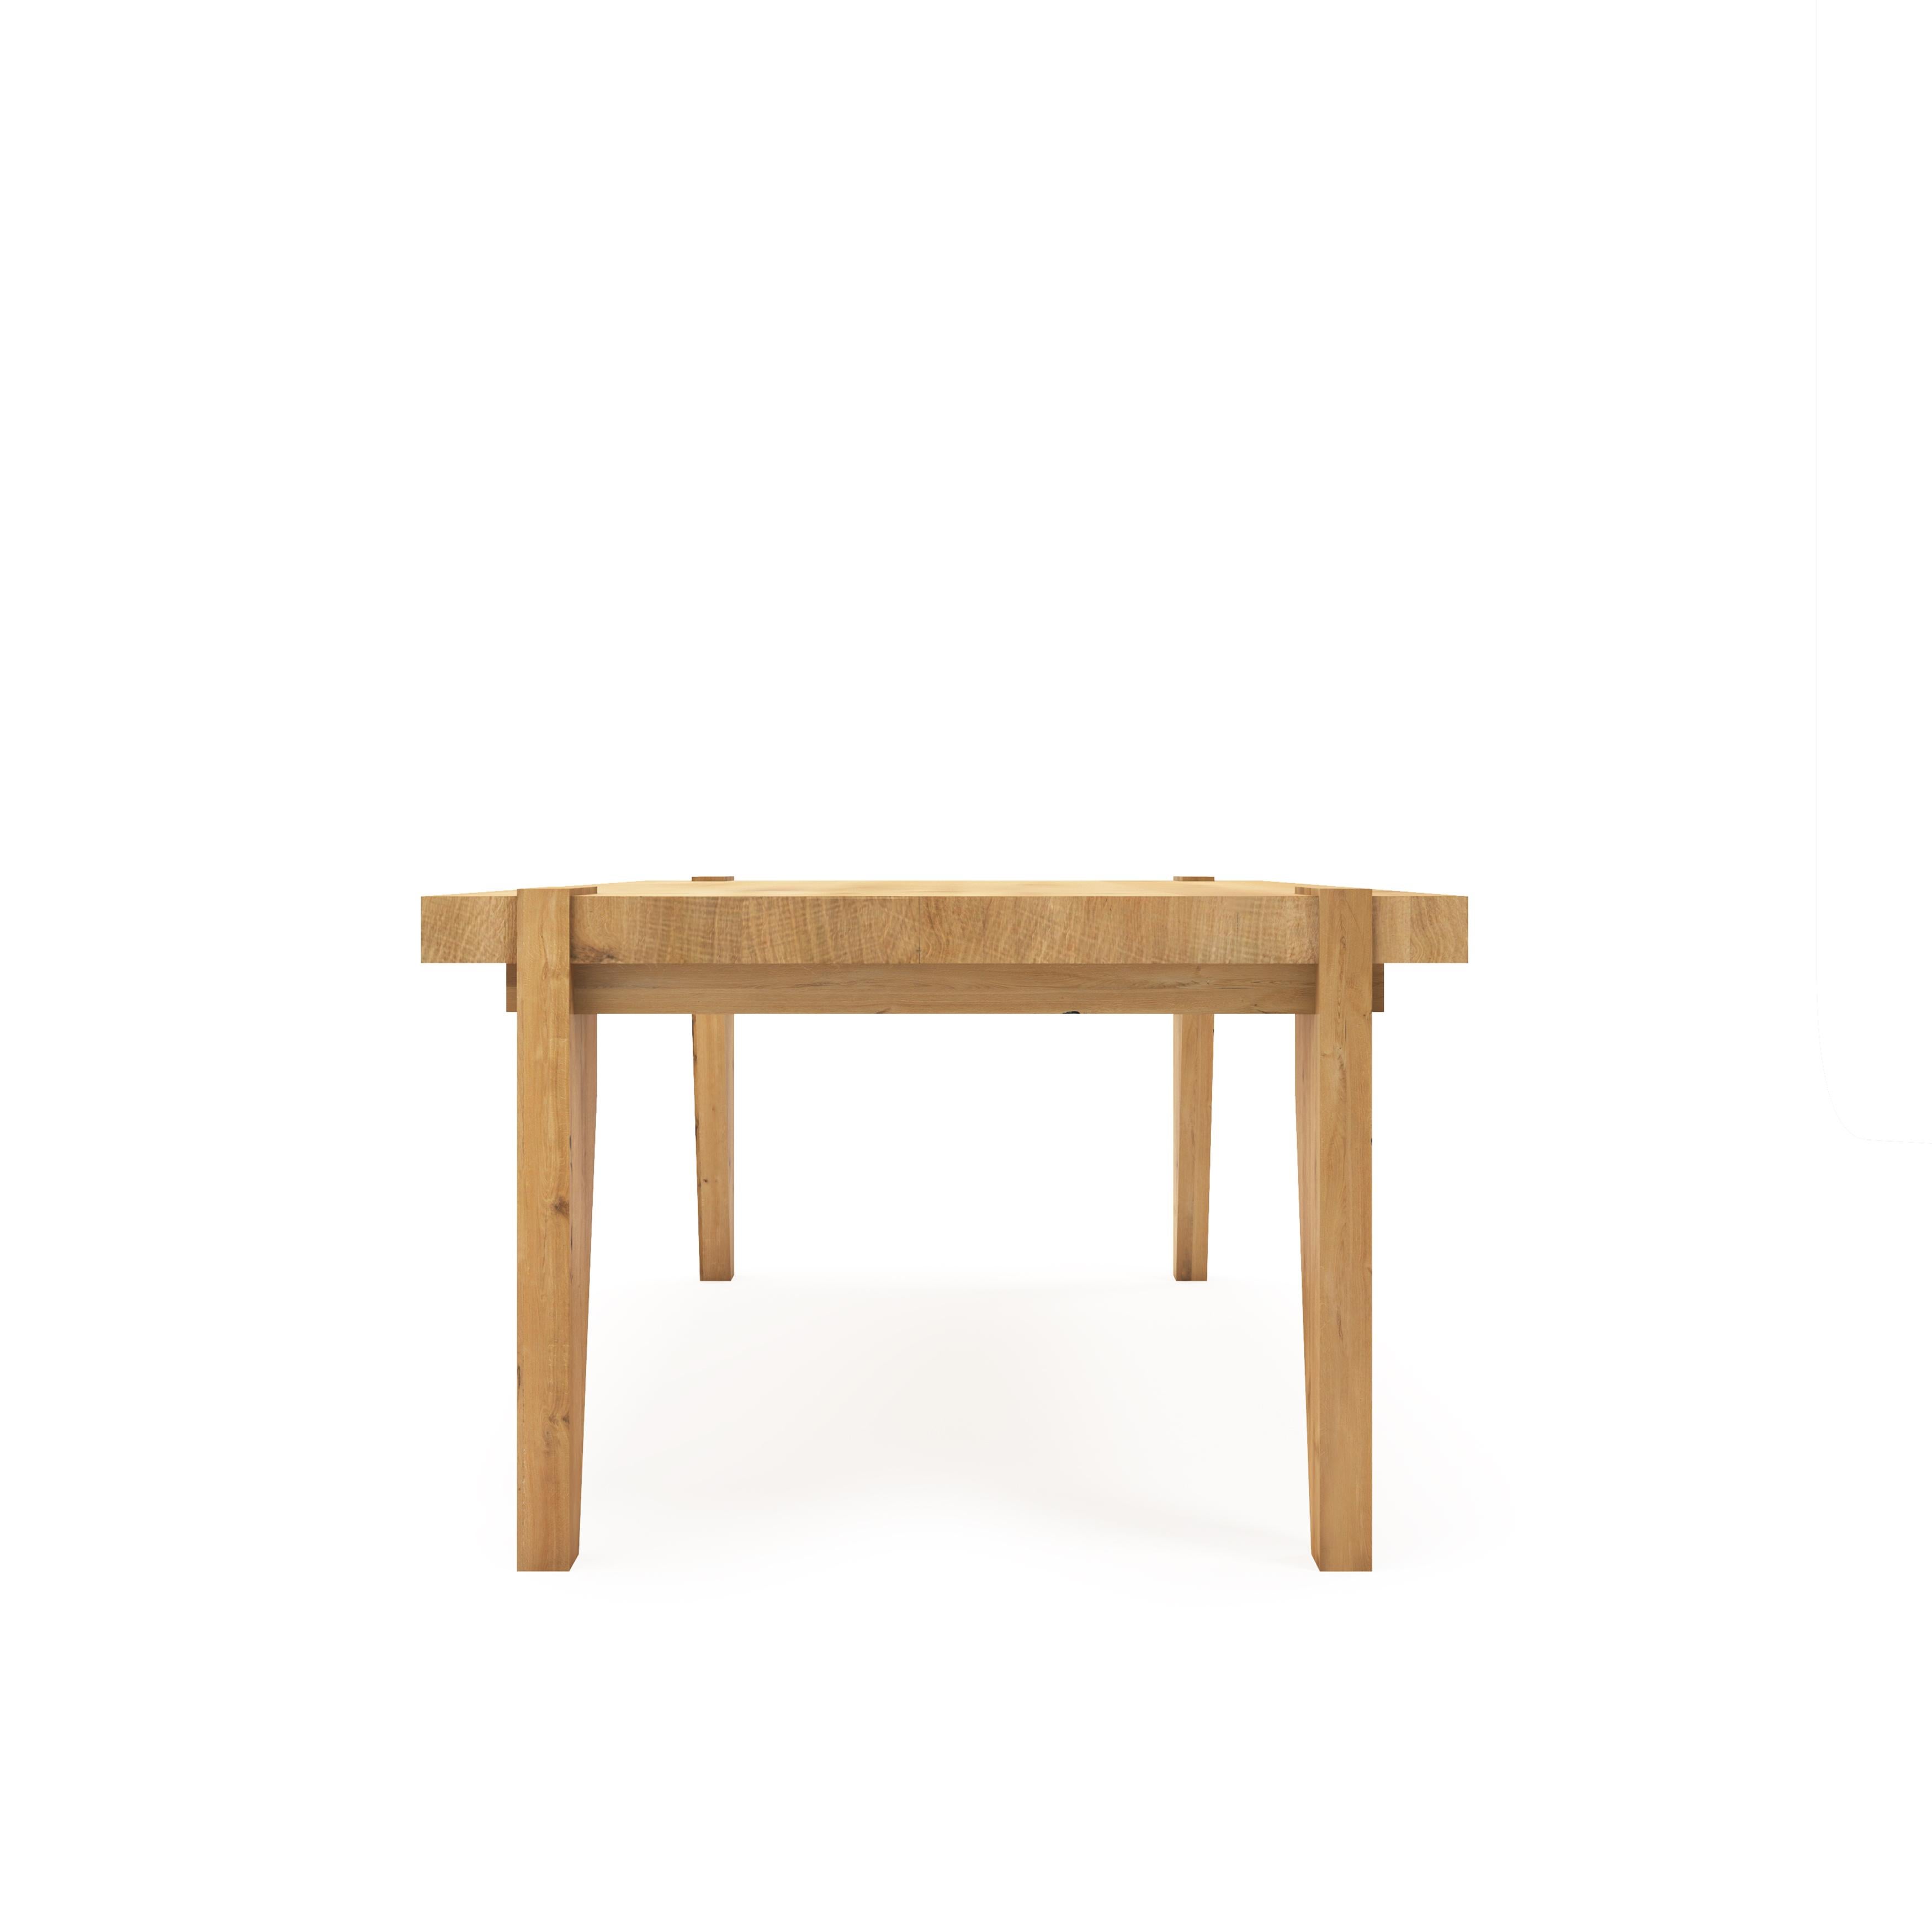 With its massive oak construction, unique wood joinery, and authentic design, this table is the perfect piece to bring beauty to any living space. Get yours today and feel the warmth of natural wood in your home.

All Tektōn pieces are made of